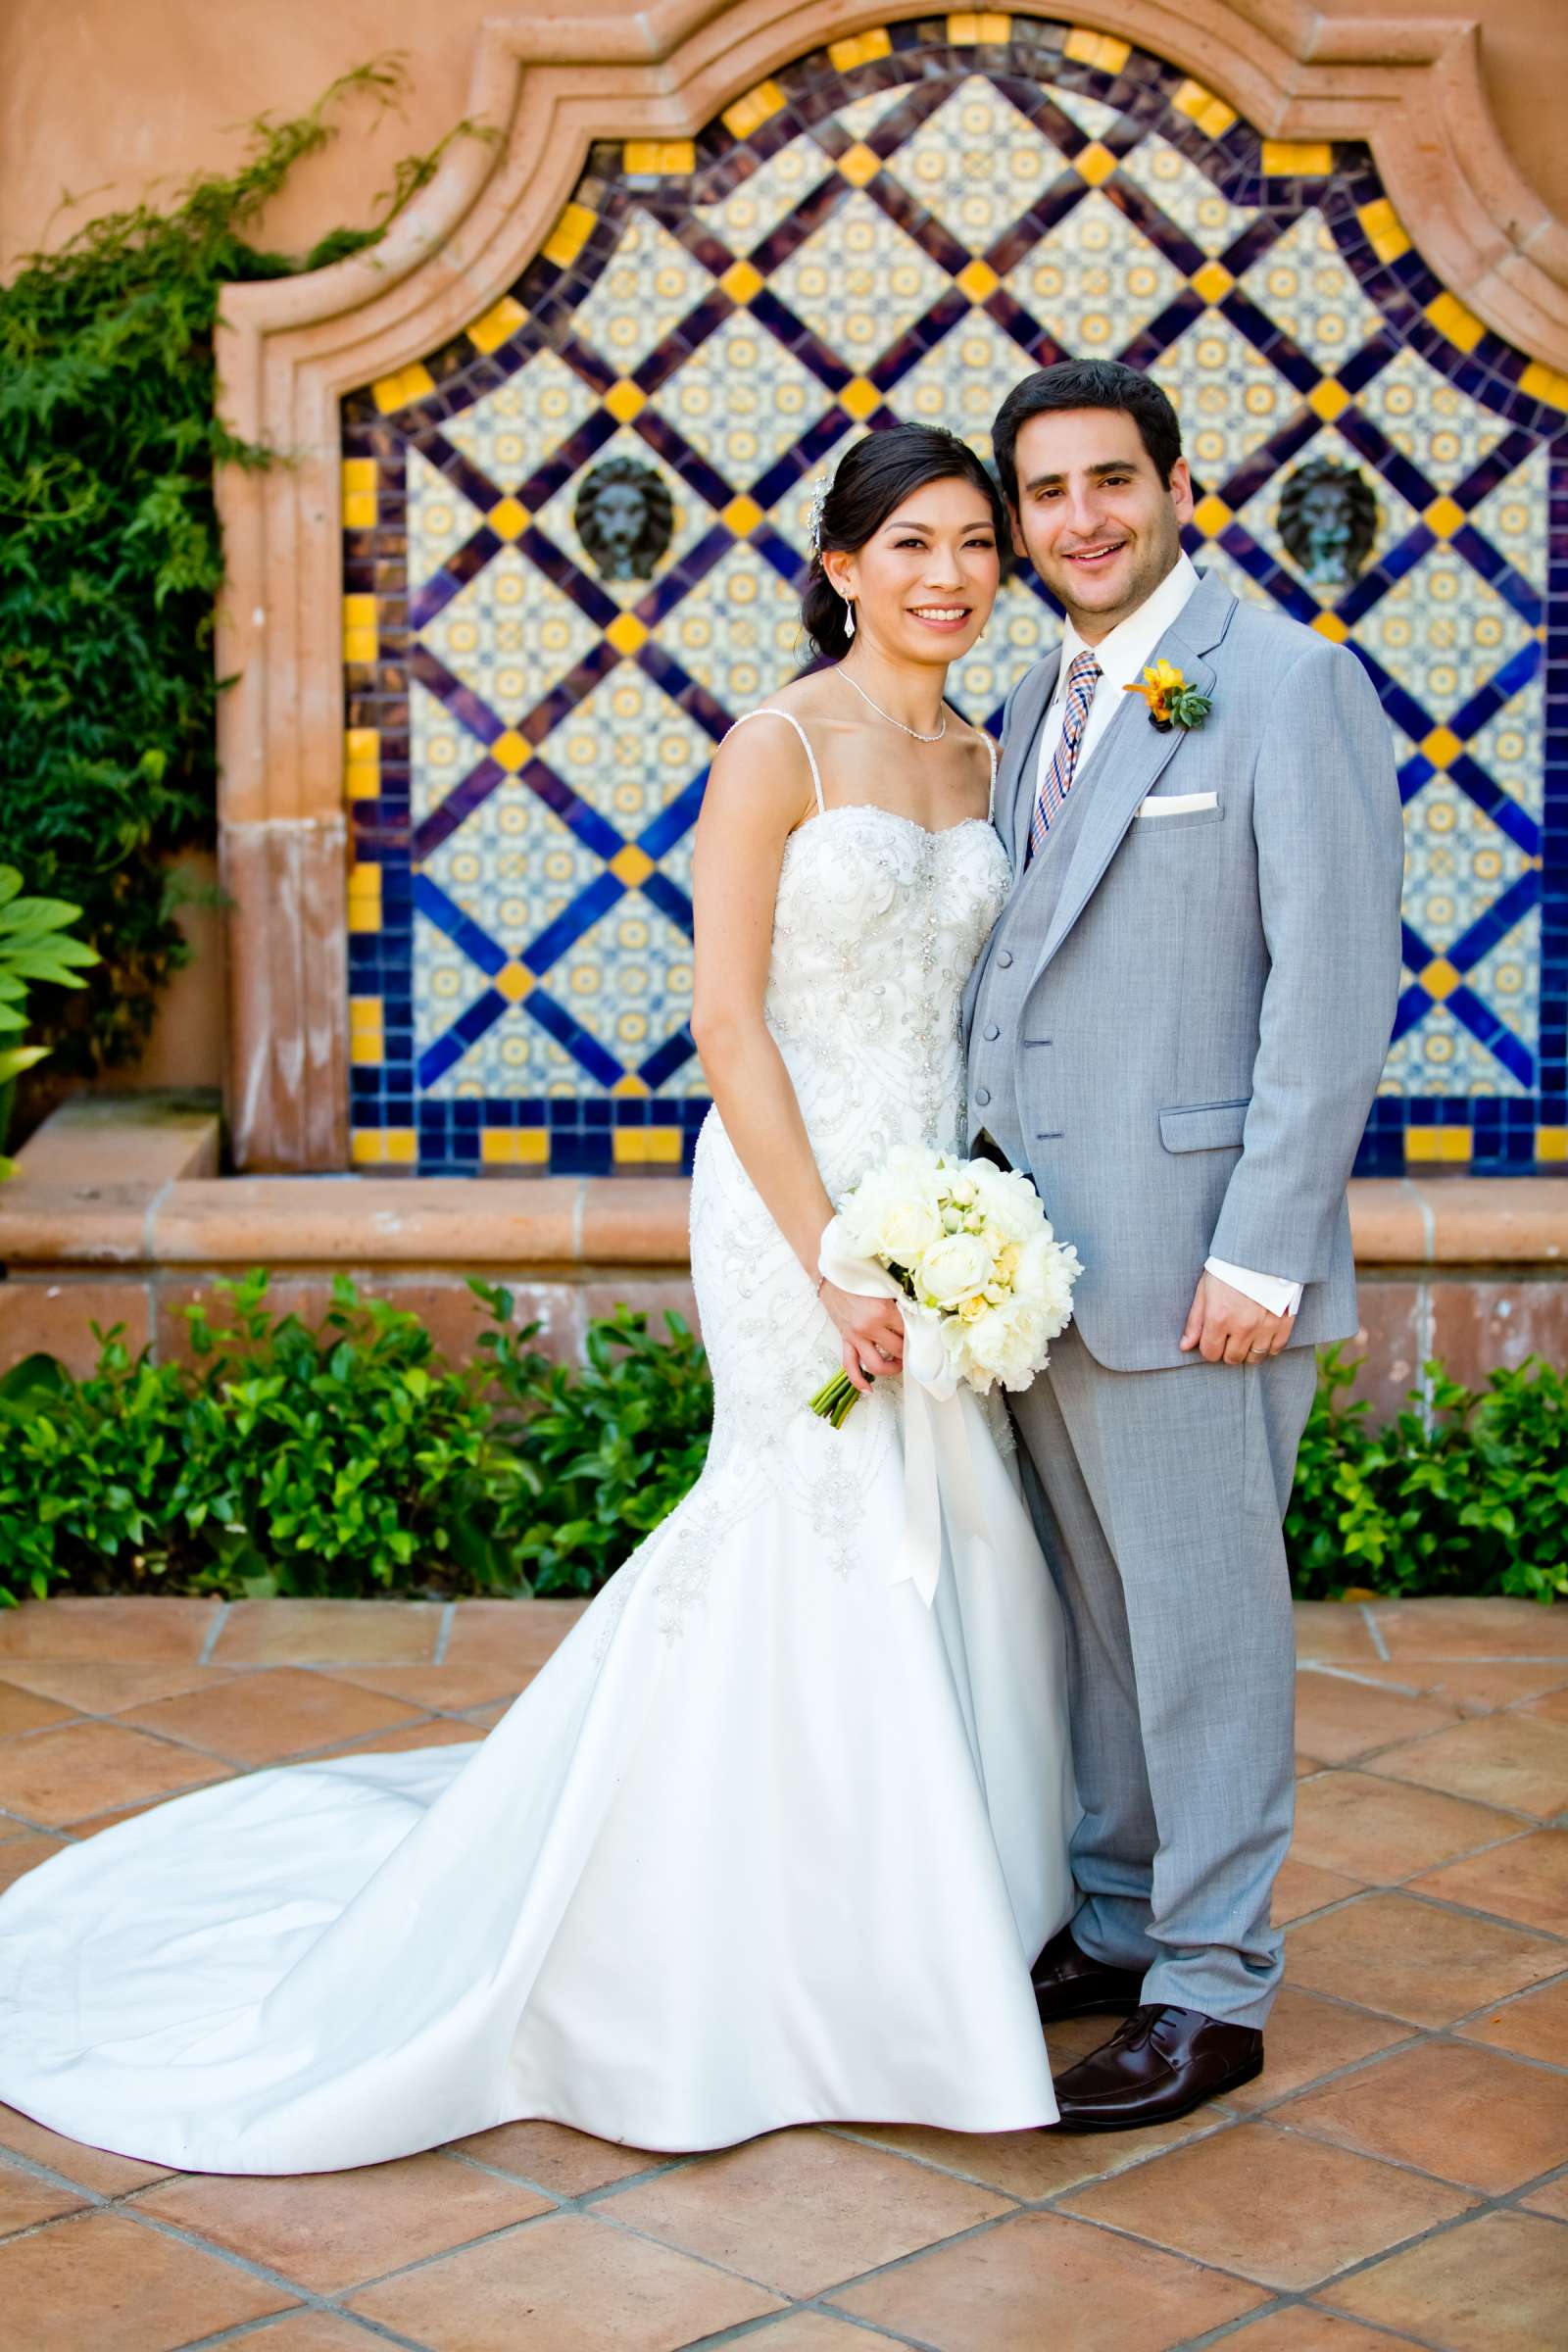 Andrew Urban and Rebecca Marinucci's Wedding Website - The Knot